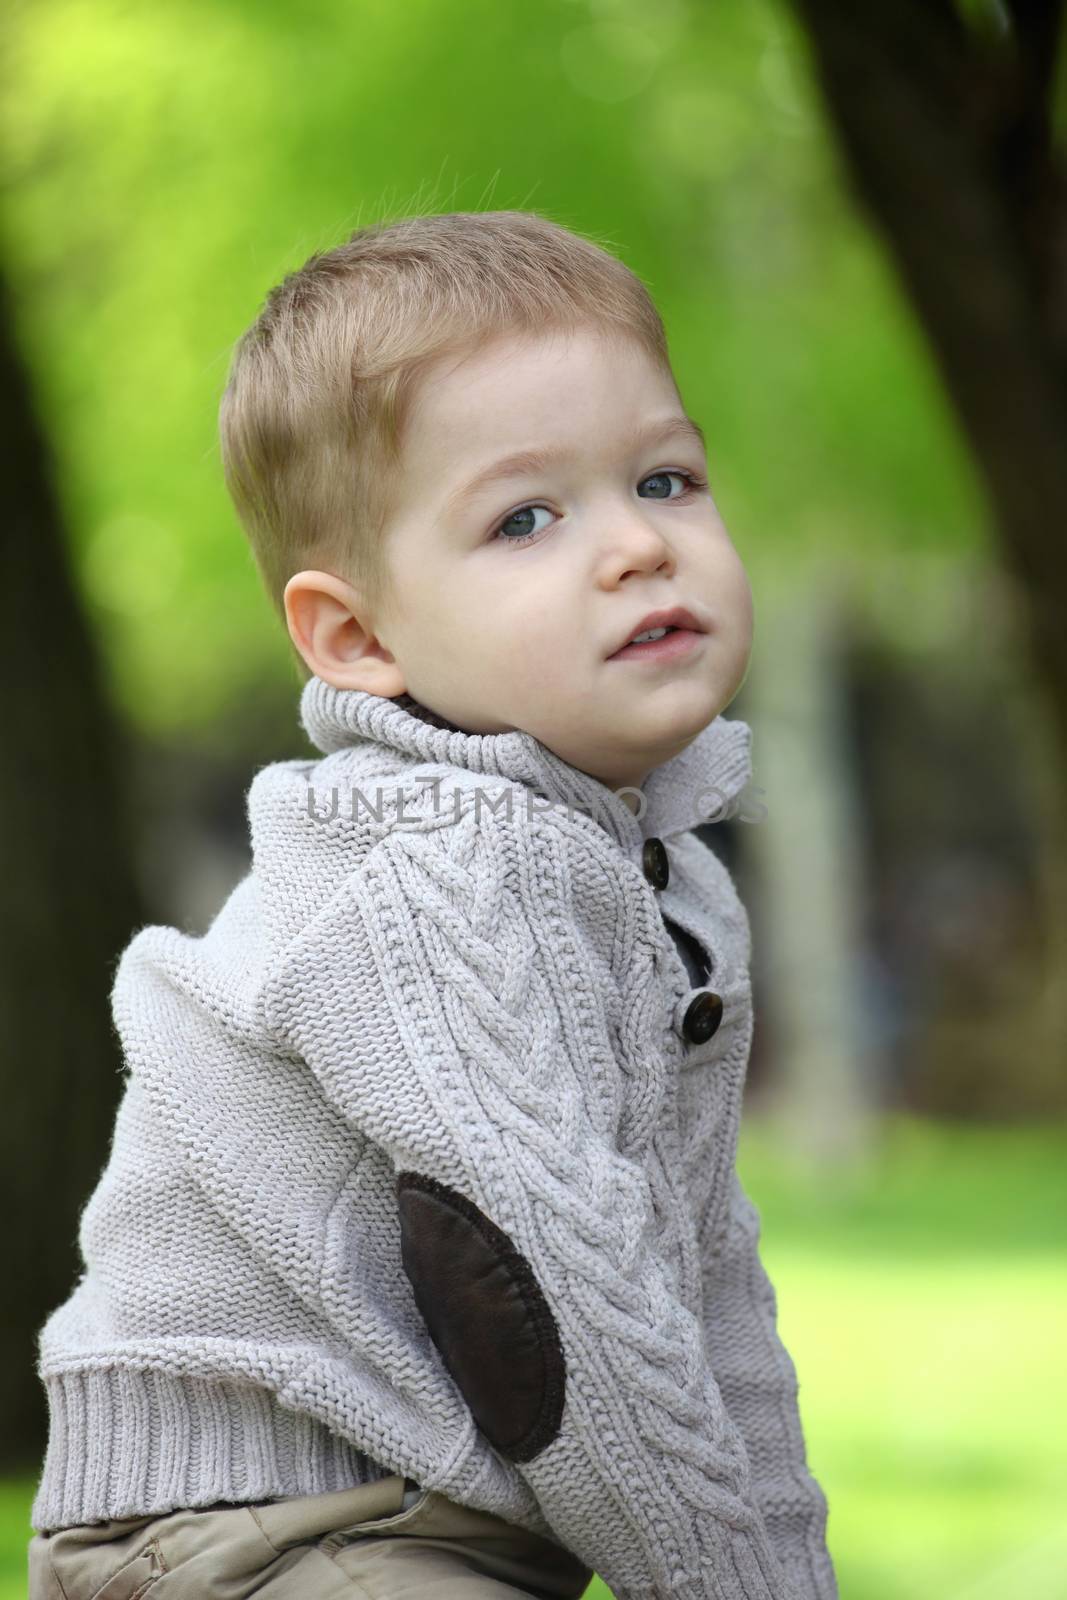 Trendy 2 years old baby boy posing in spring/autumn park